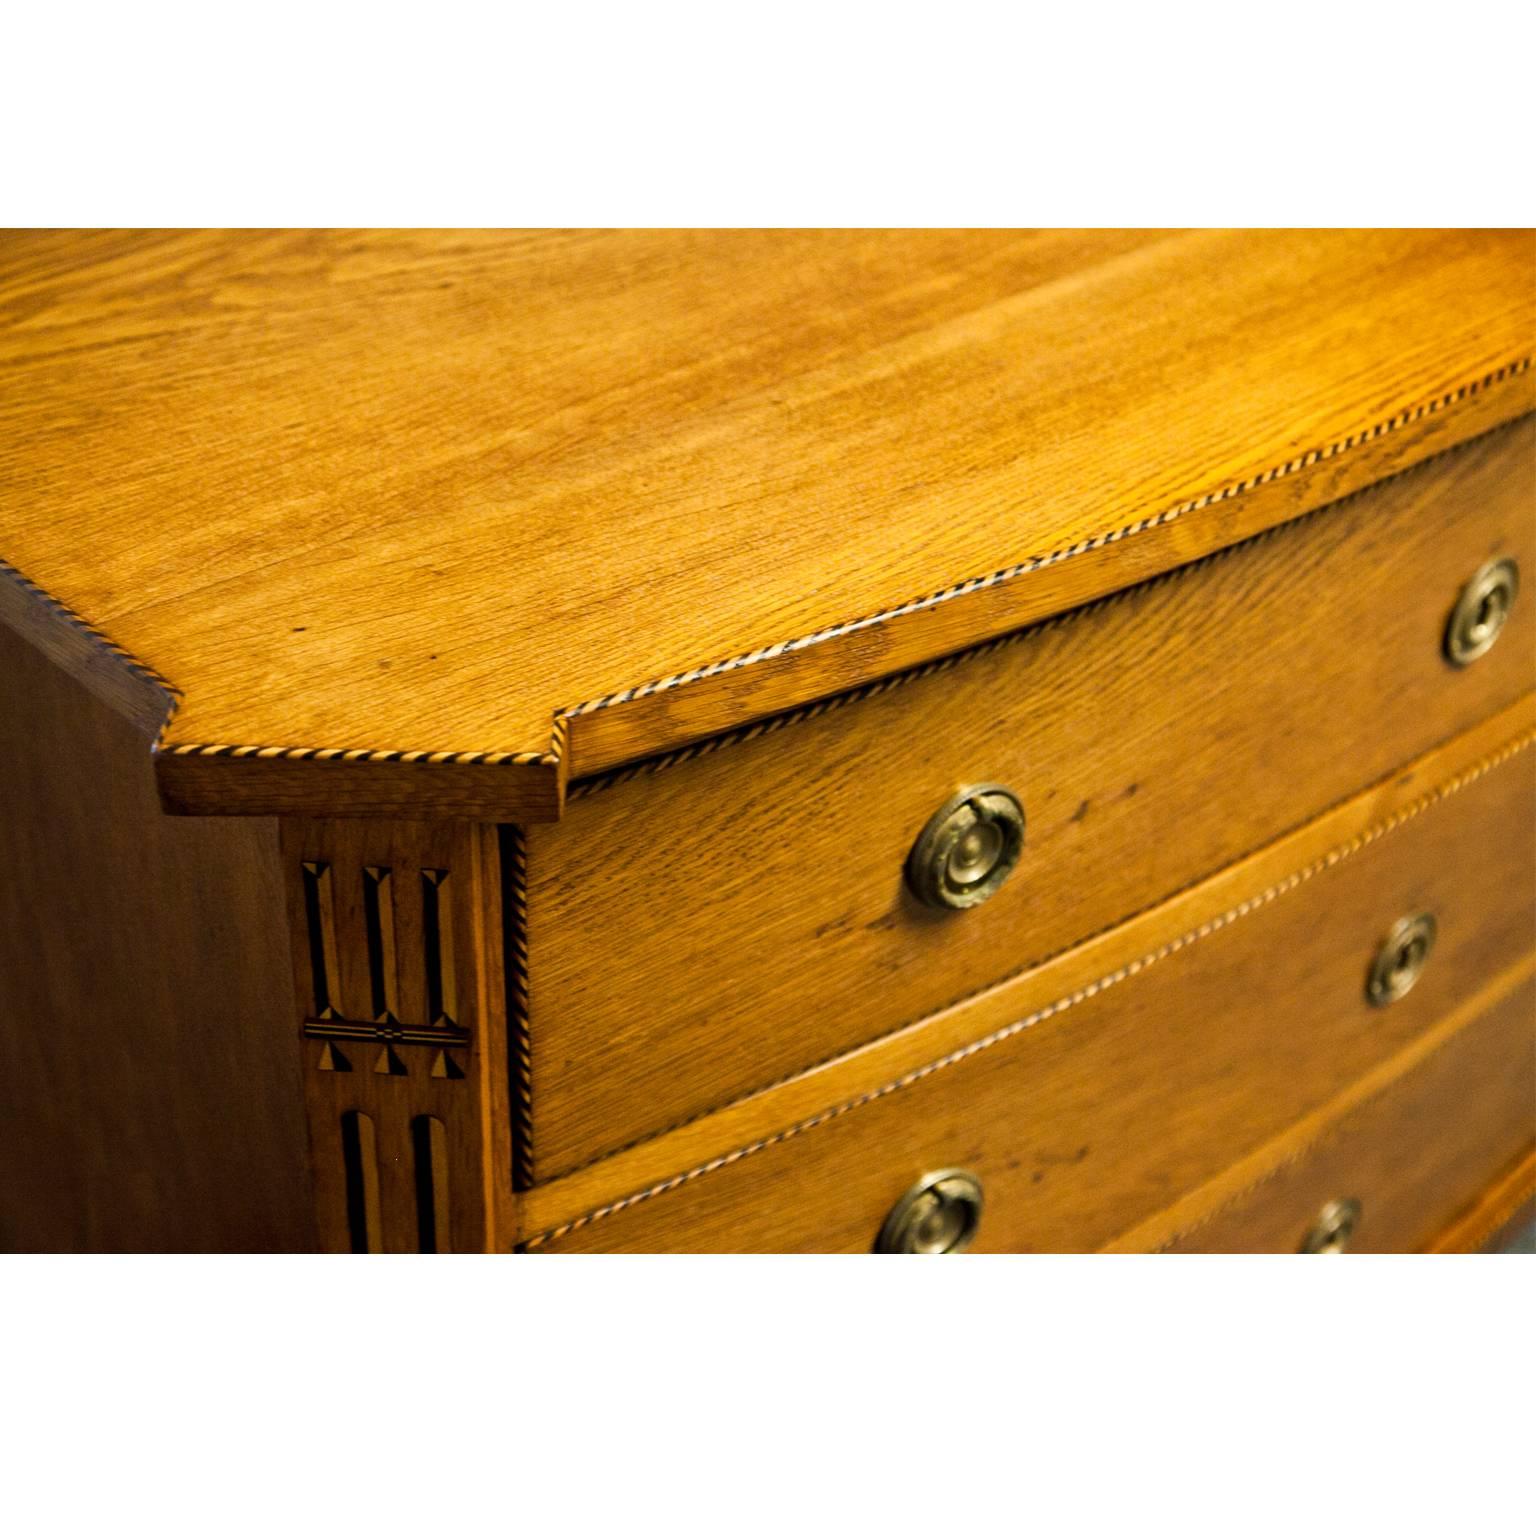 Three-drawer chest of drawers with slightly curved front, standing on tapered feet. The slanted corners as well as the skirt and the edges are decorated with filet marquetry.